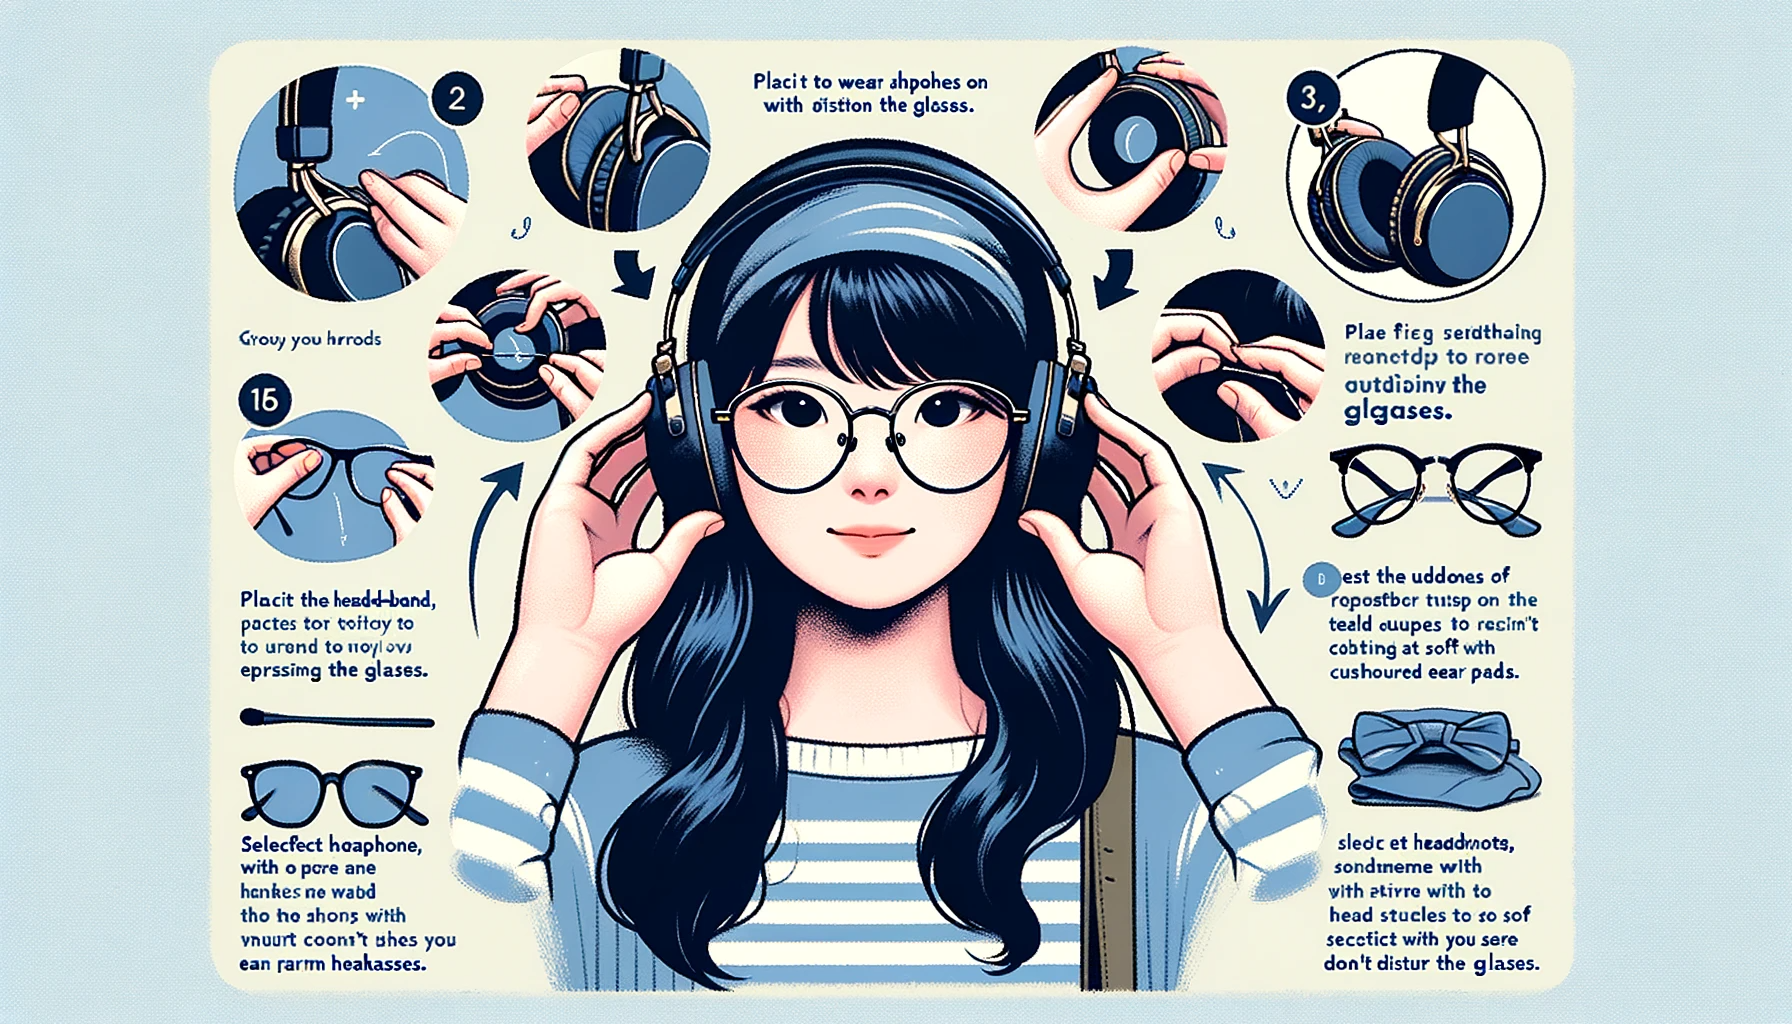 How to Wear Headphones with Glasses? A Step-By-Step Guide!